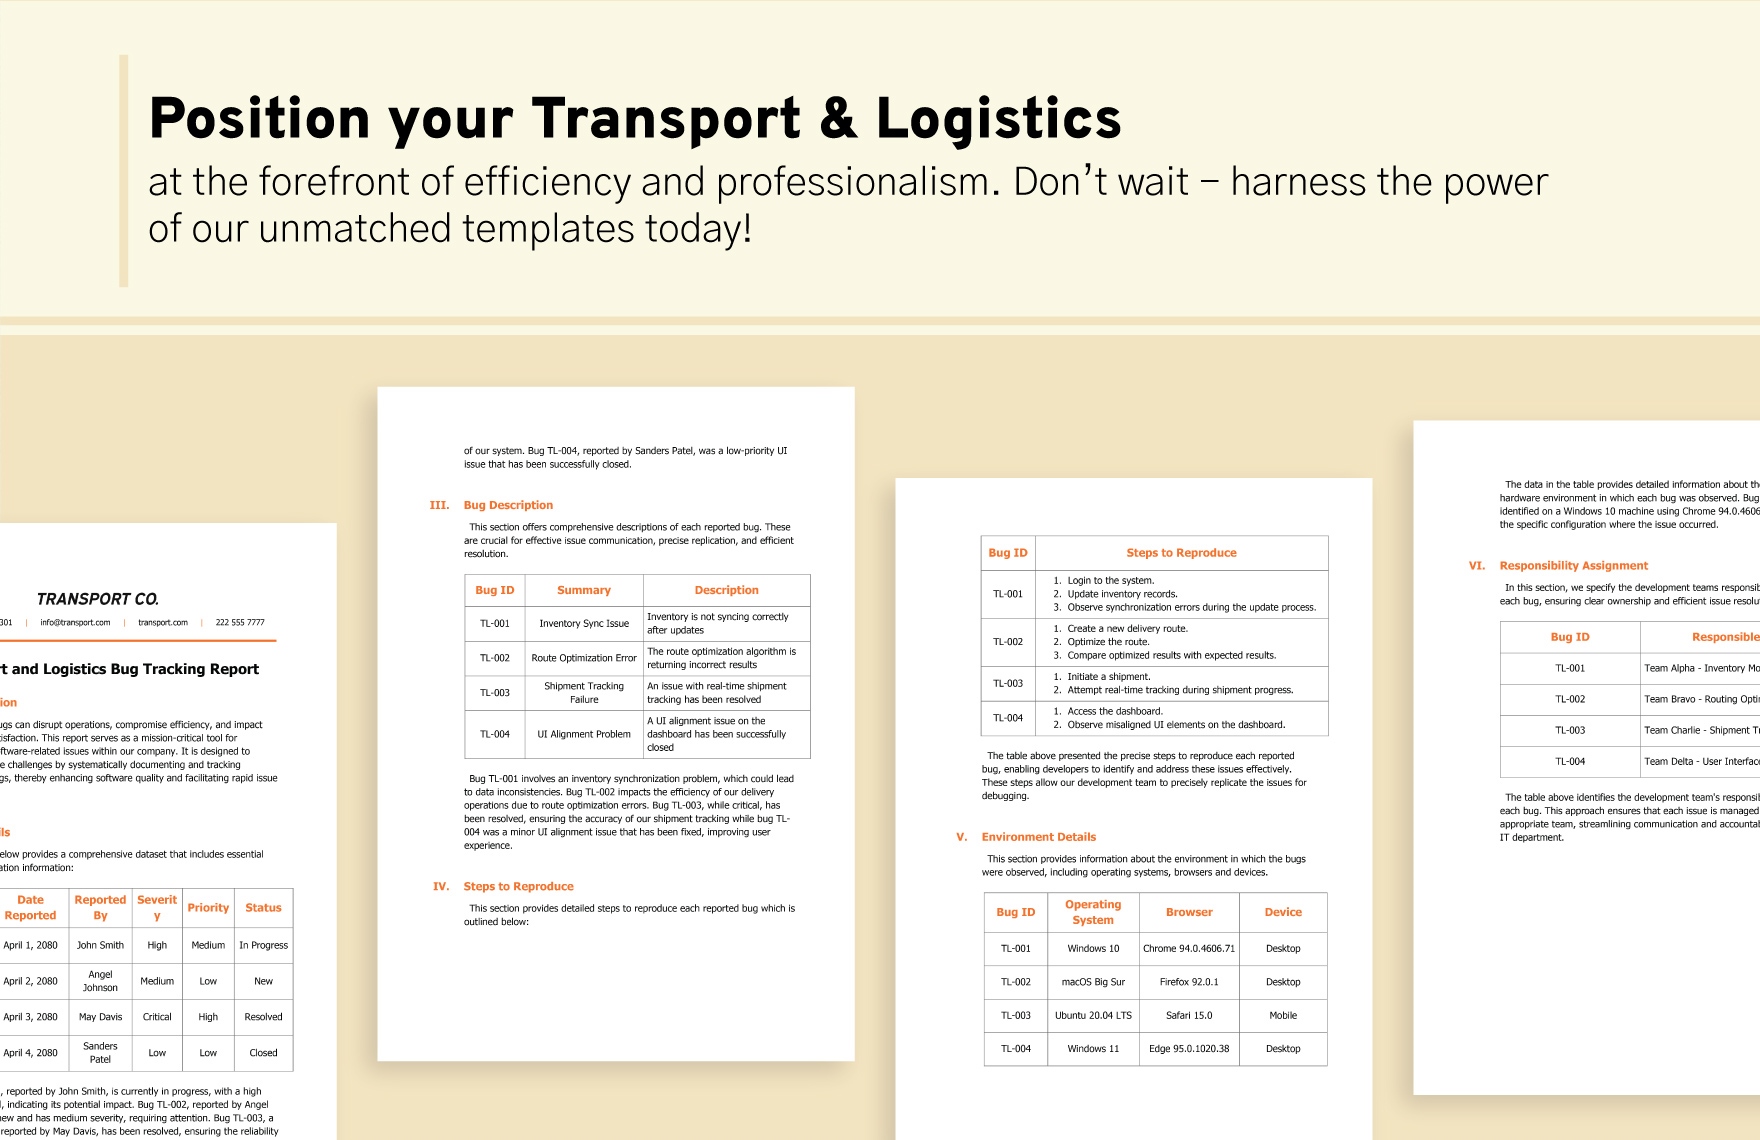 Transport and Logistics Bug Tracking Report Template